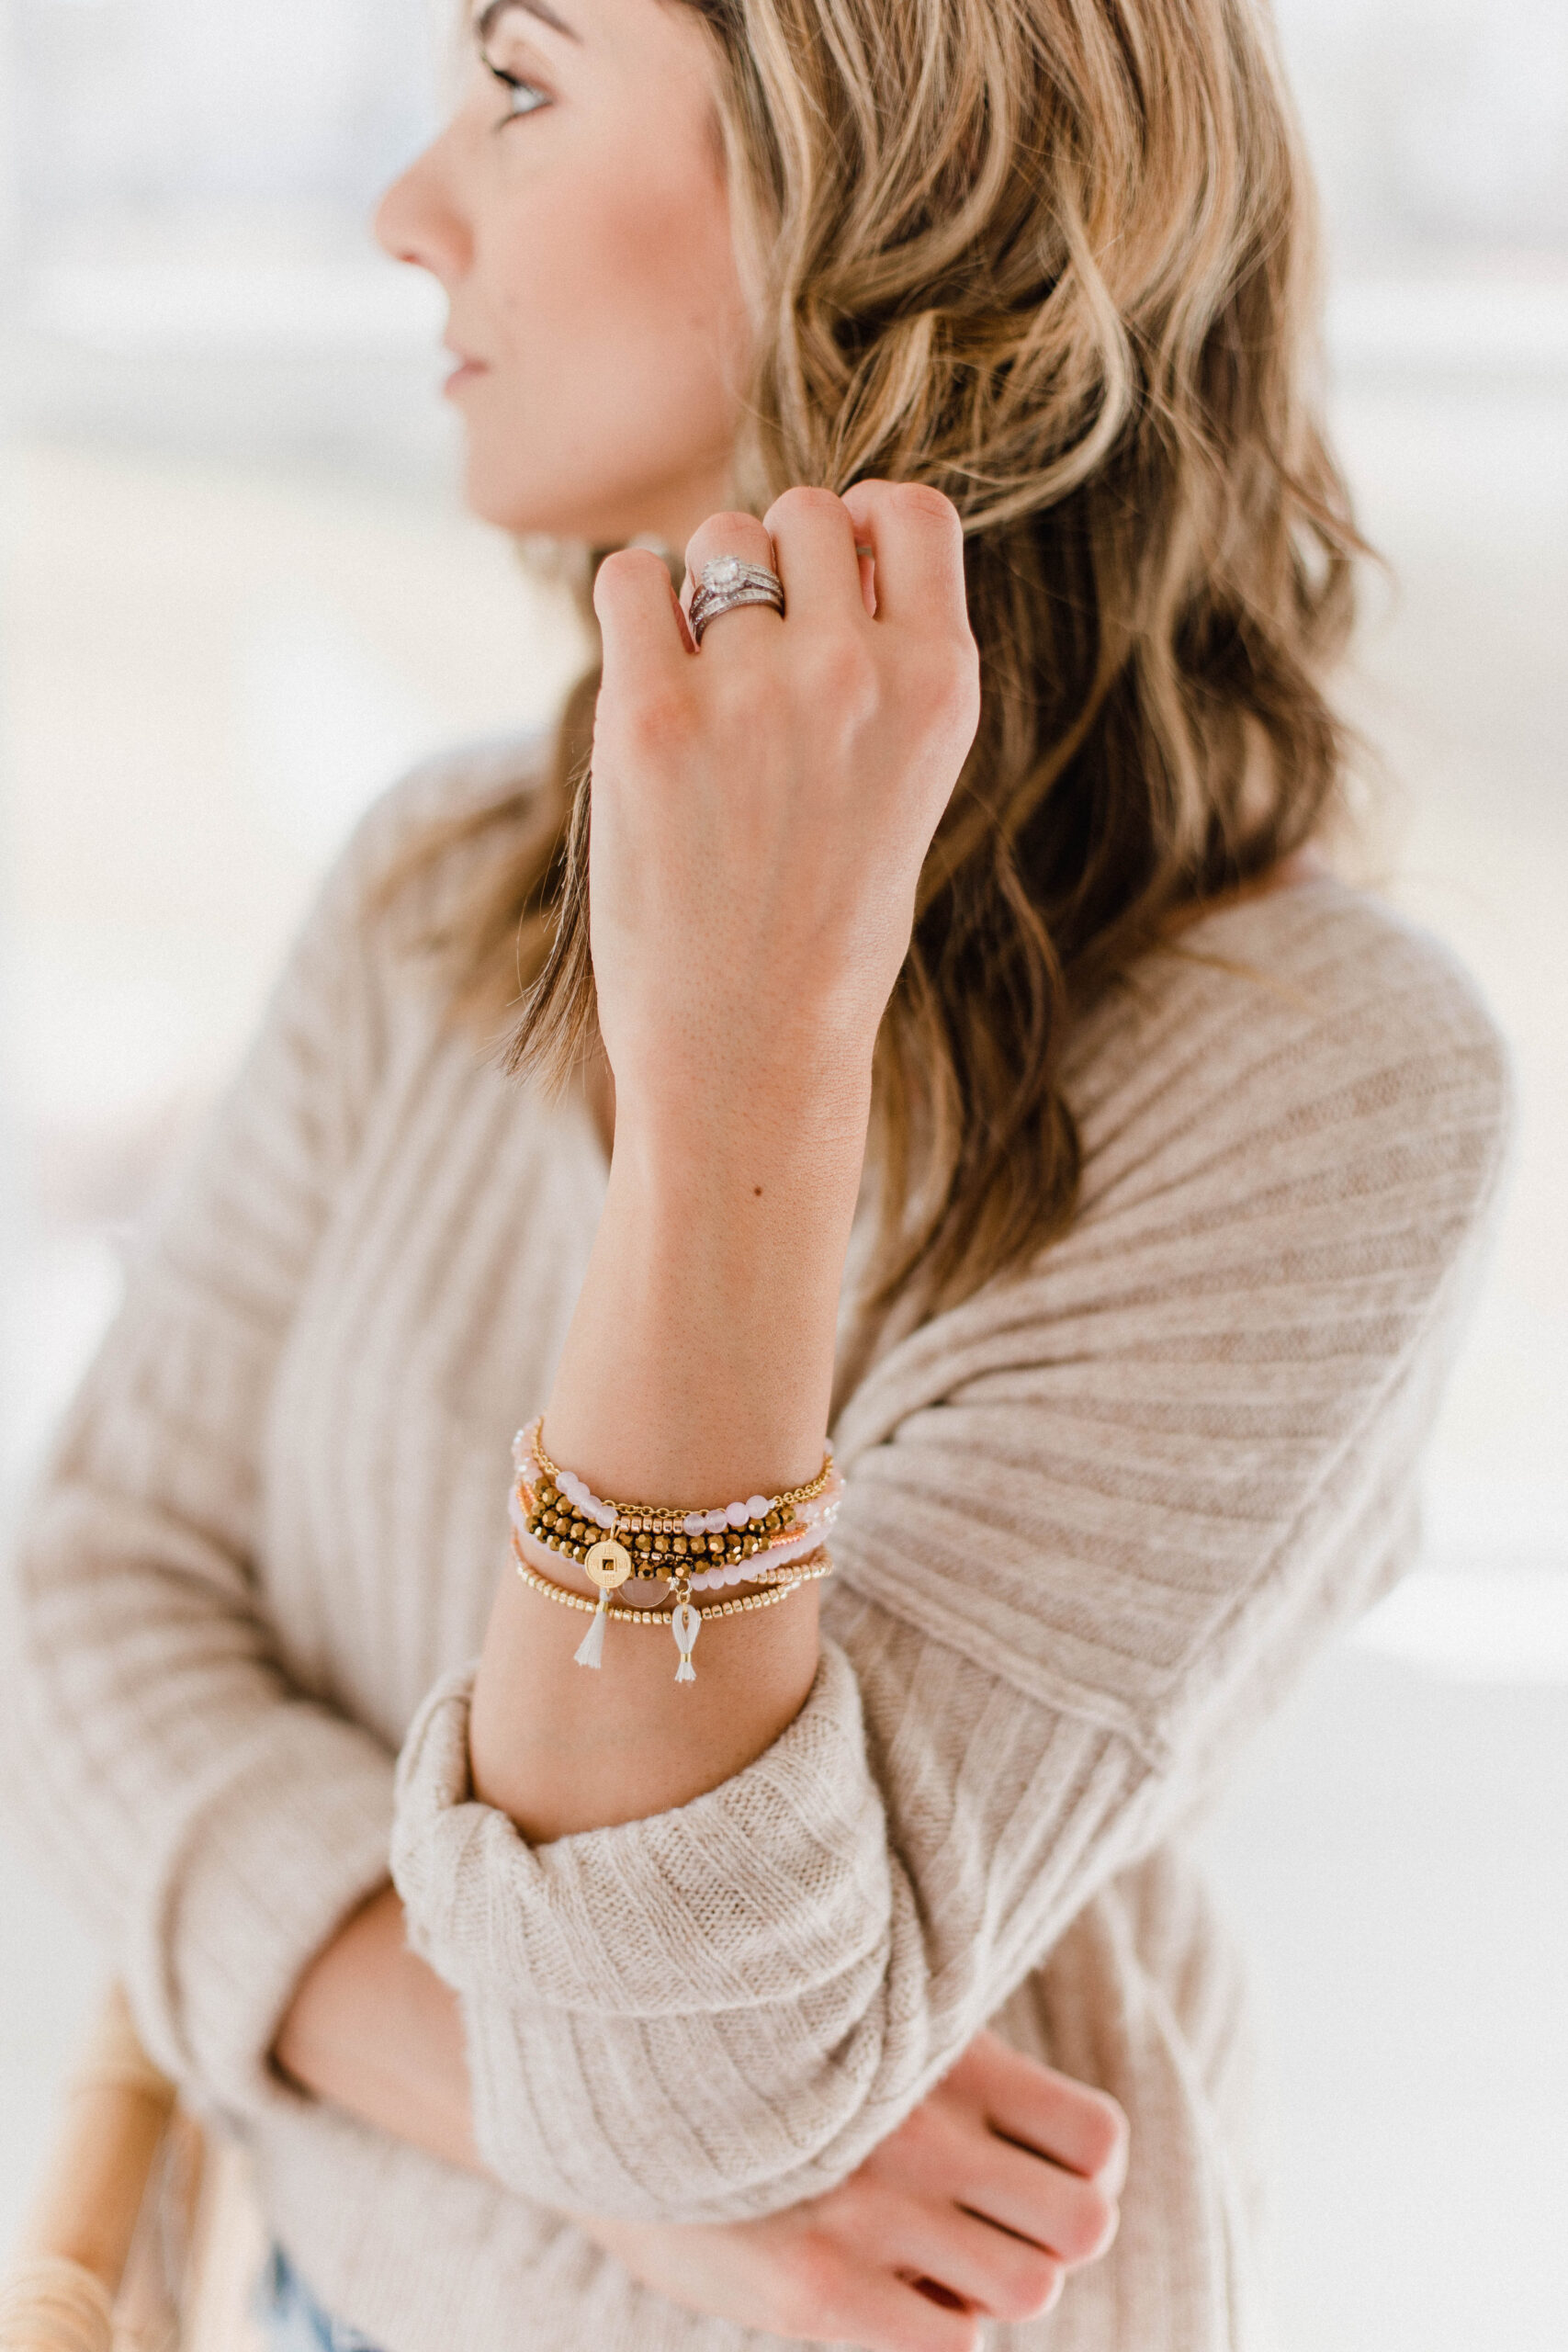 Connecticut life and style blogger Lauren McBride shares her Victoria Emerson St. Patrick's Day sale picks, including boho cuffs, wraps, and more.